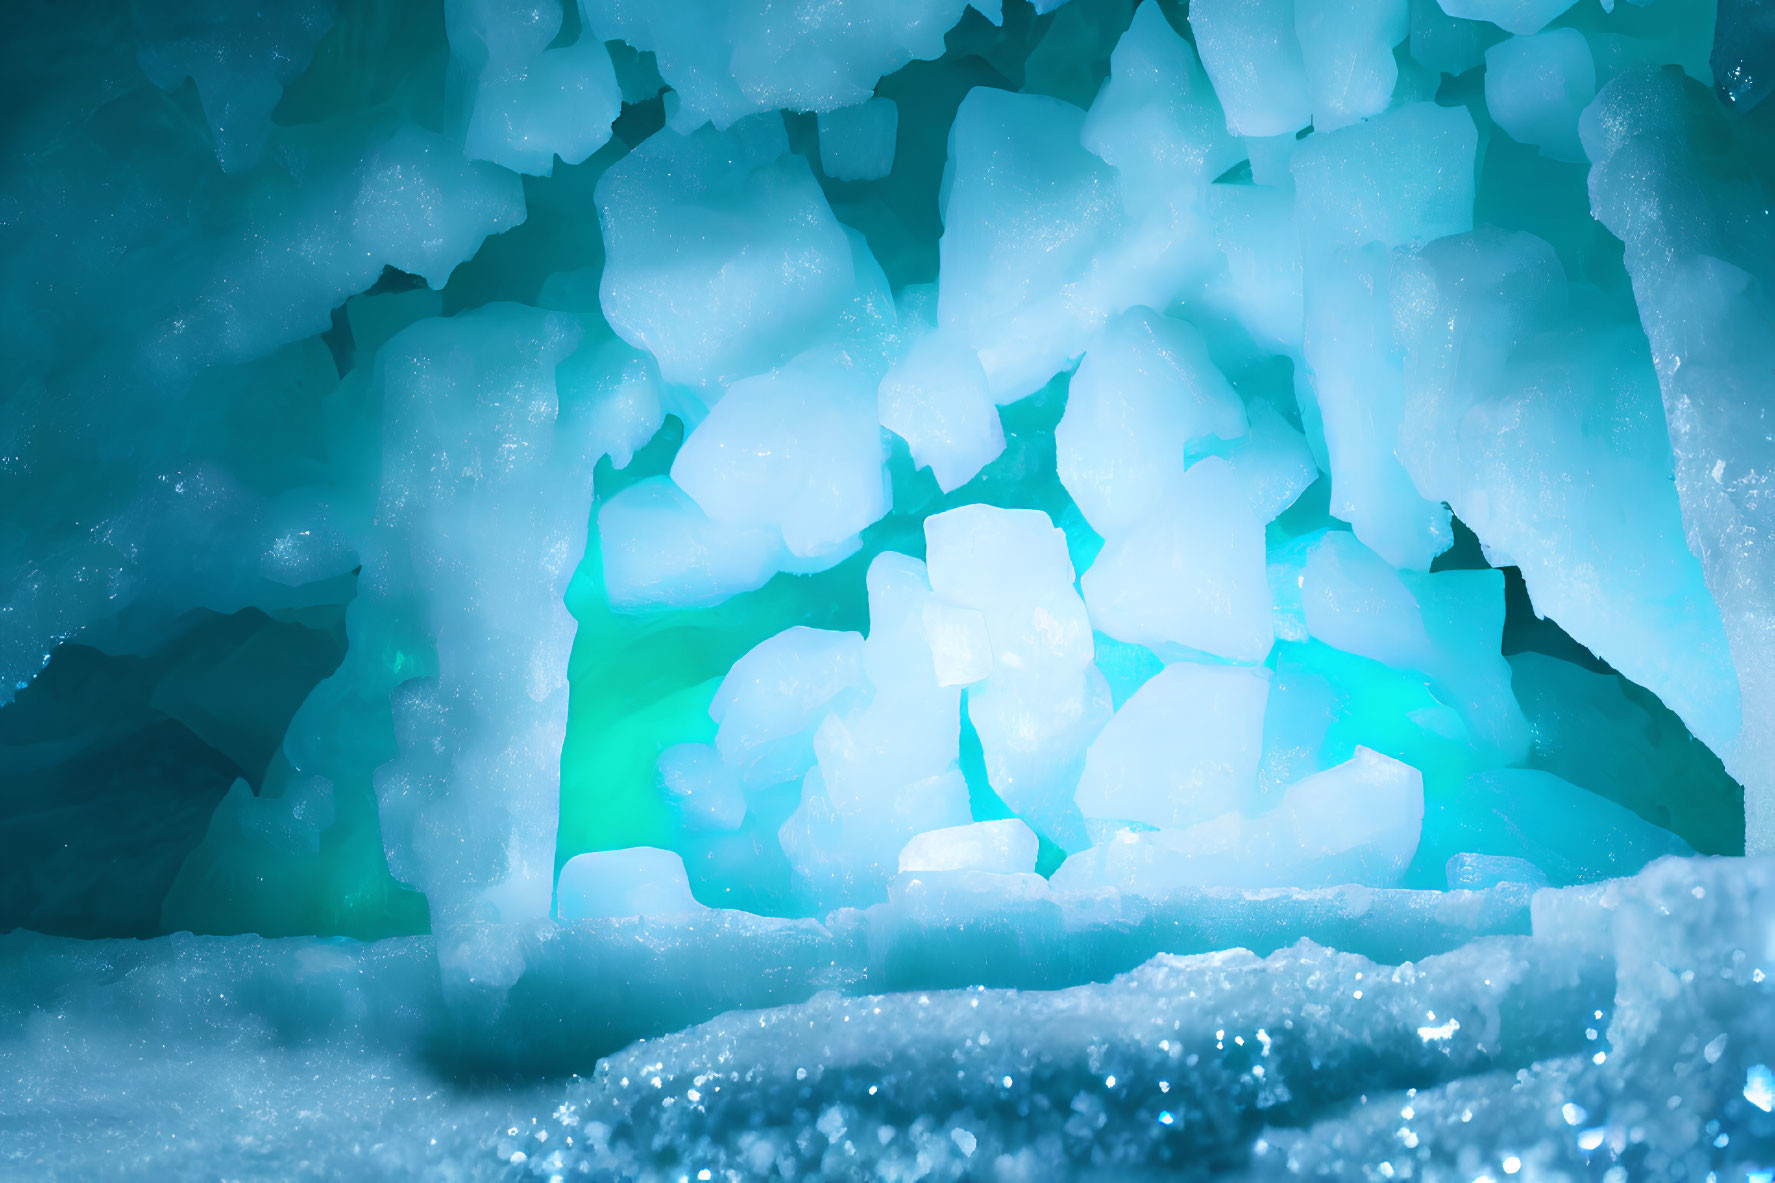 Turquoise Glow in Icy Cave with Crystalline Ice Formations